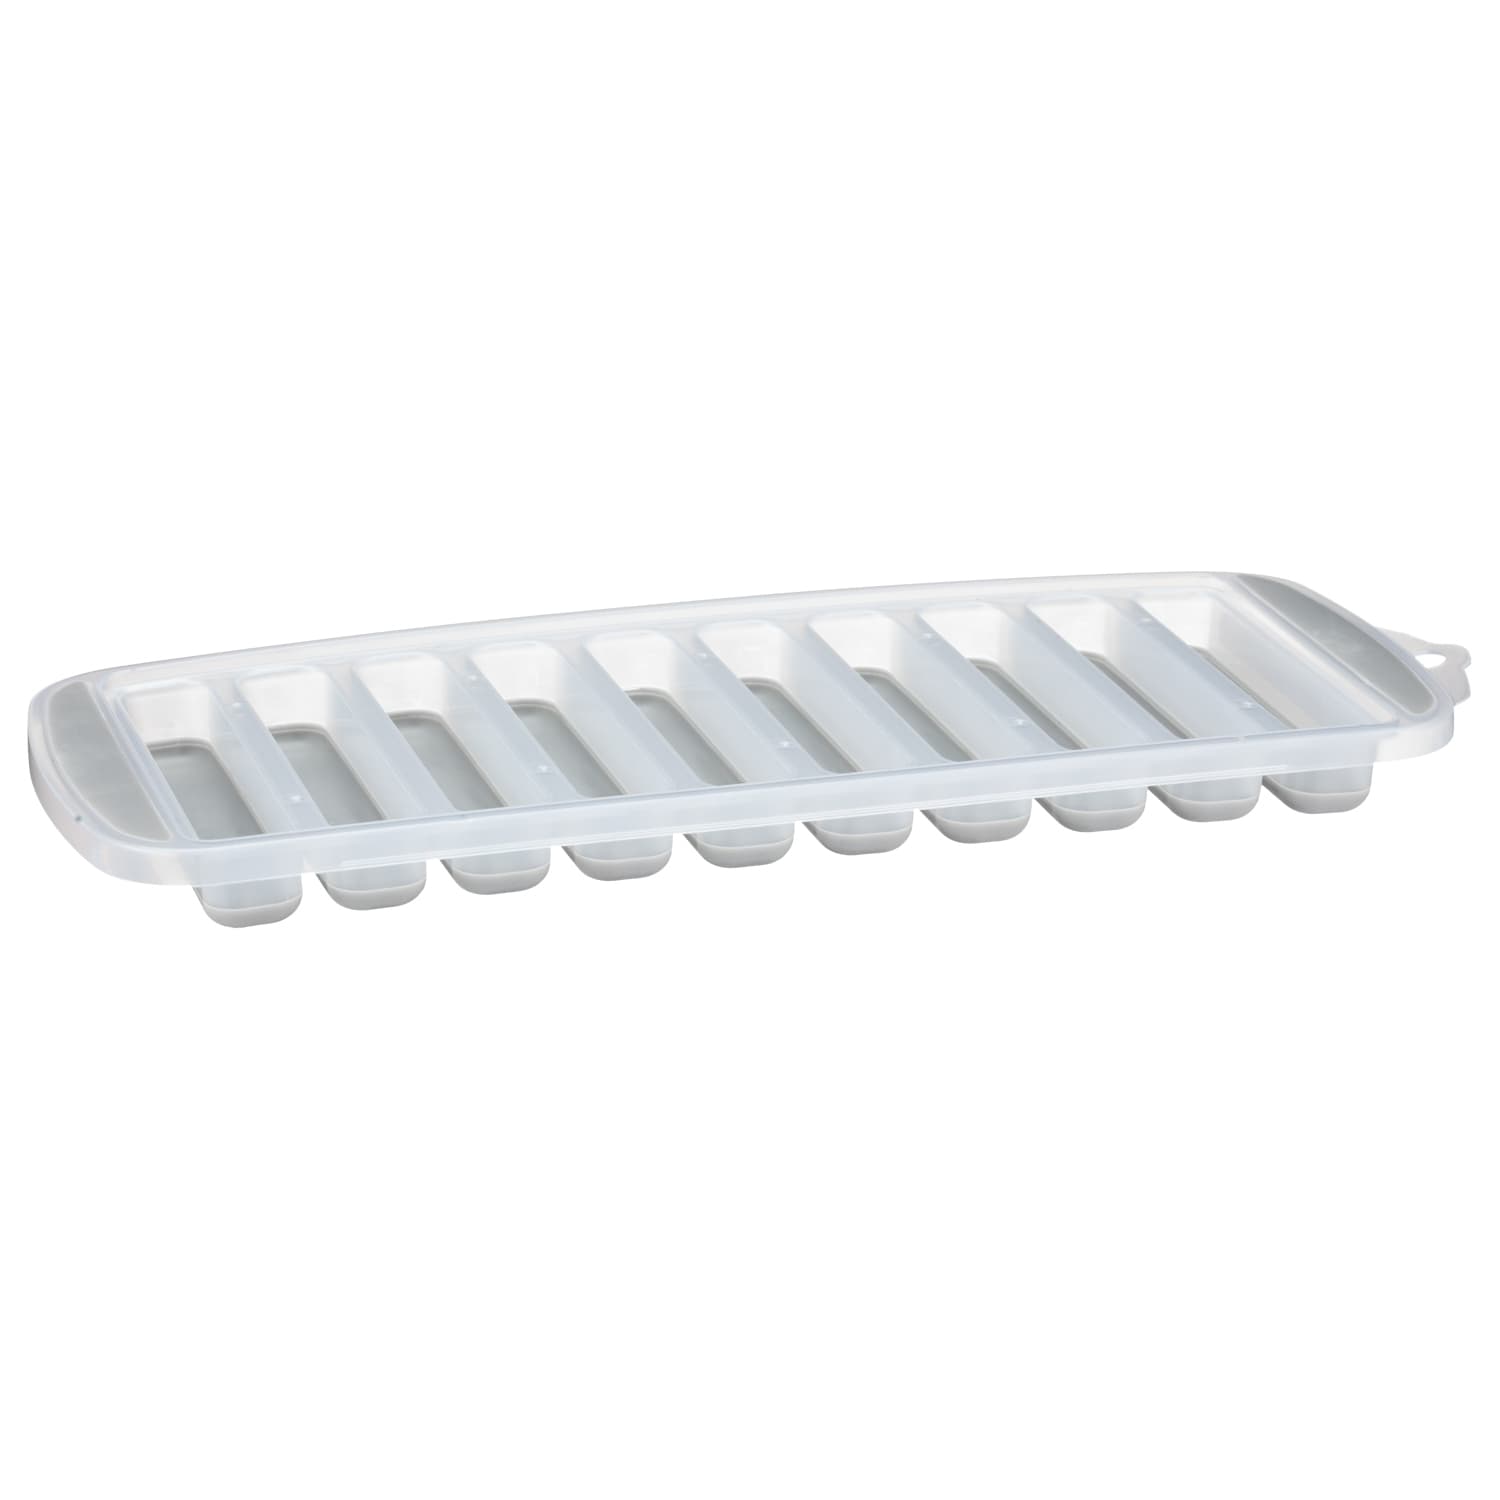 https://www.bmstores.co.uk/images/hpcProductImage/imgSource/394556-water-bottle-ice-cube-tray-grey.jpg